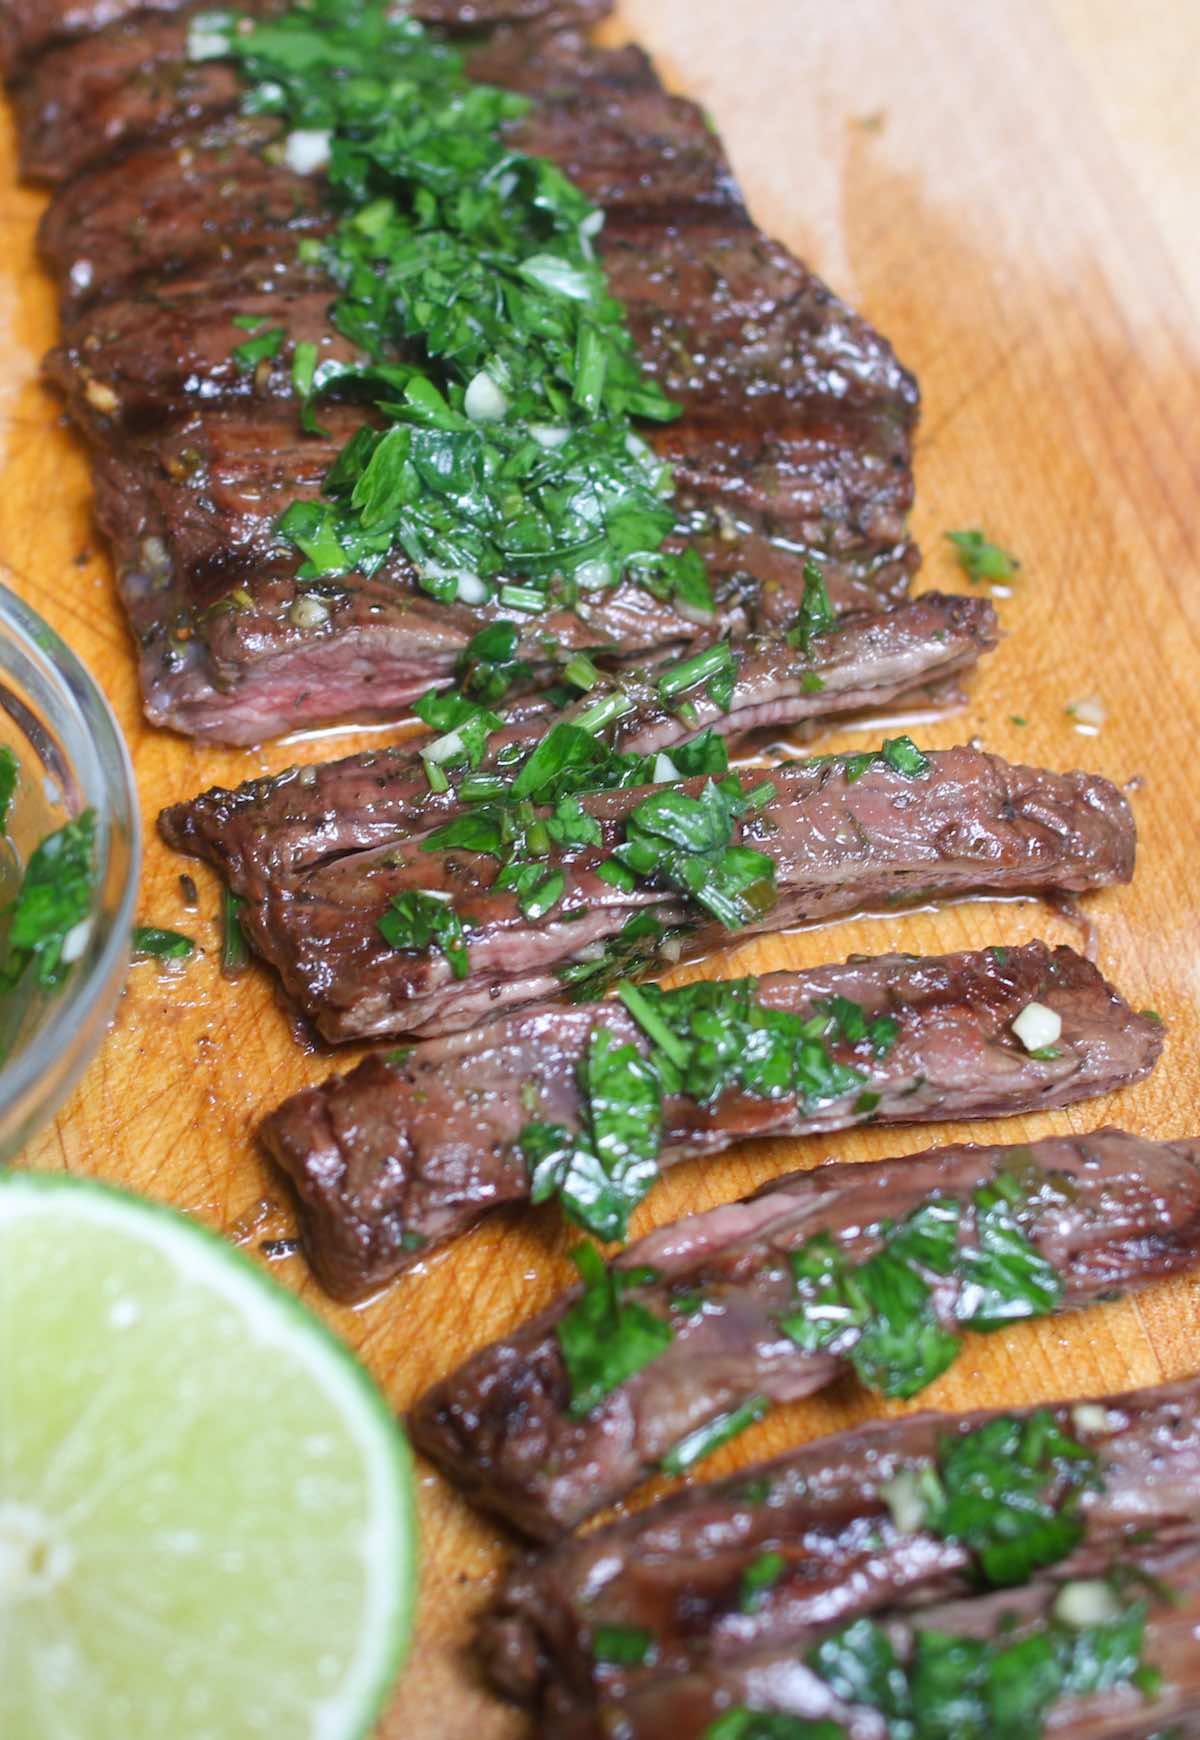 This Skirt Steak is melt-in-your-mouth delicious with a tender and juicy texture. A simple trick to get the best-tasting skirt steak recipe is marinating the meat prior to grilling or pan-searing.